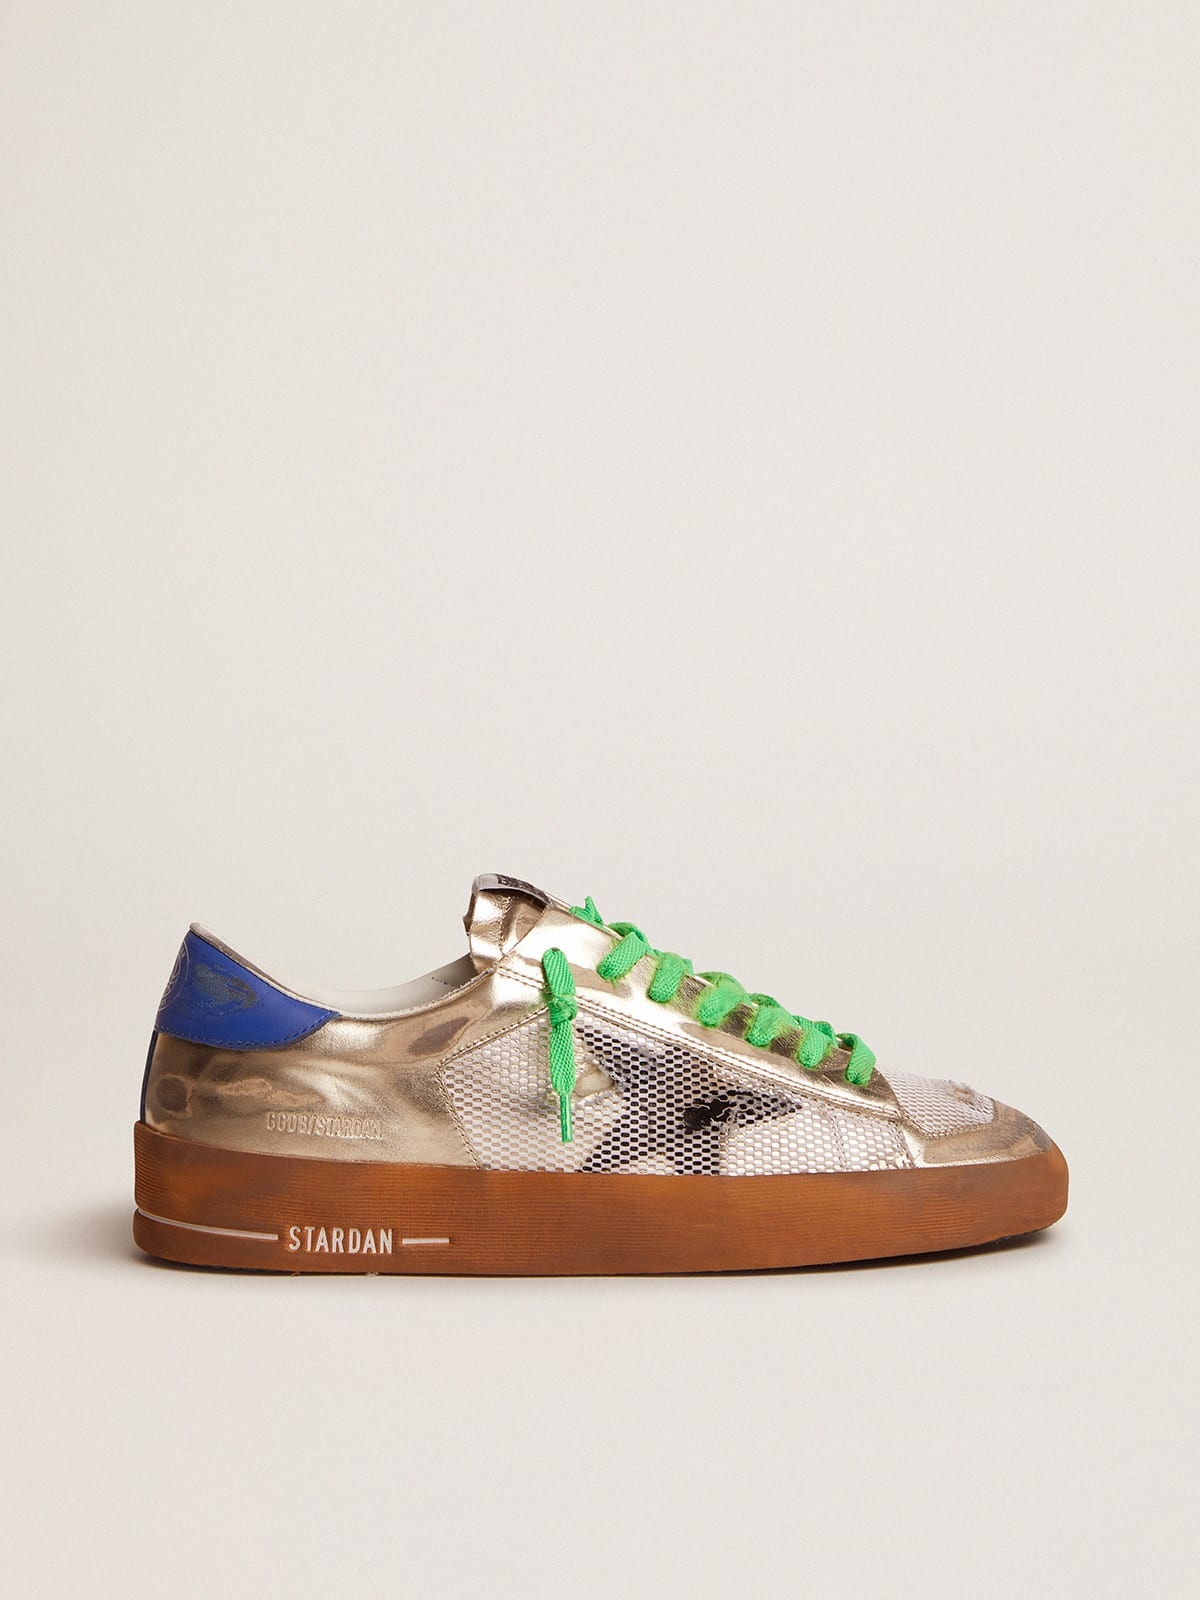 Golden Goose Men\'s Stardan LAB sneakers in laminated leather and mesh with  a blue heel tab | REVERSIBLE